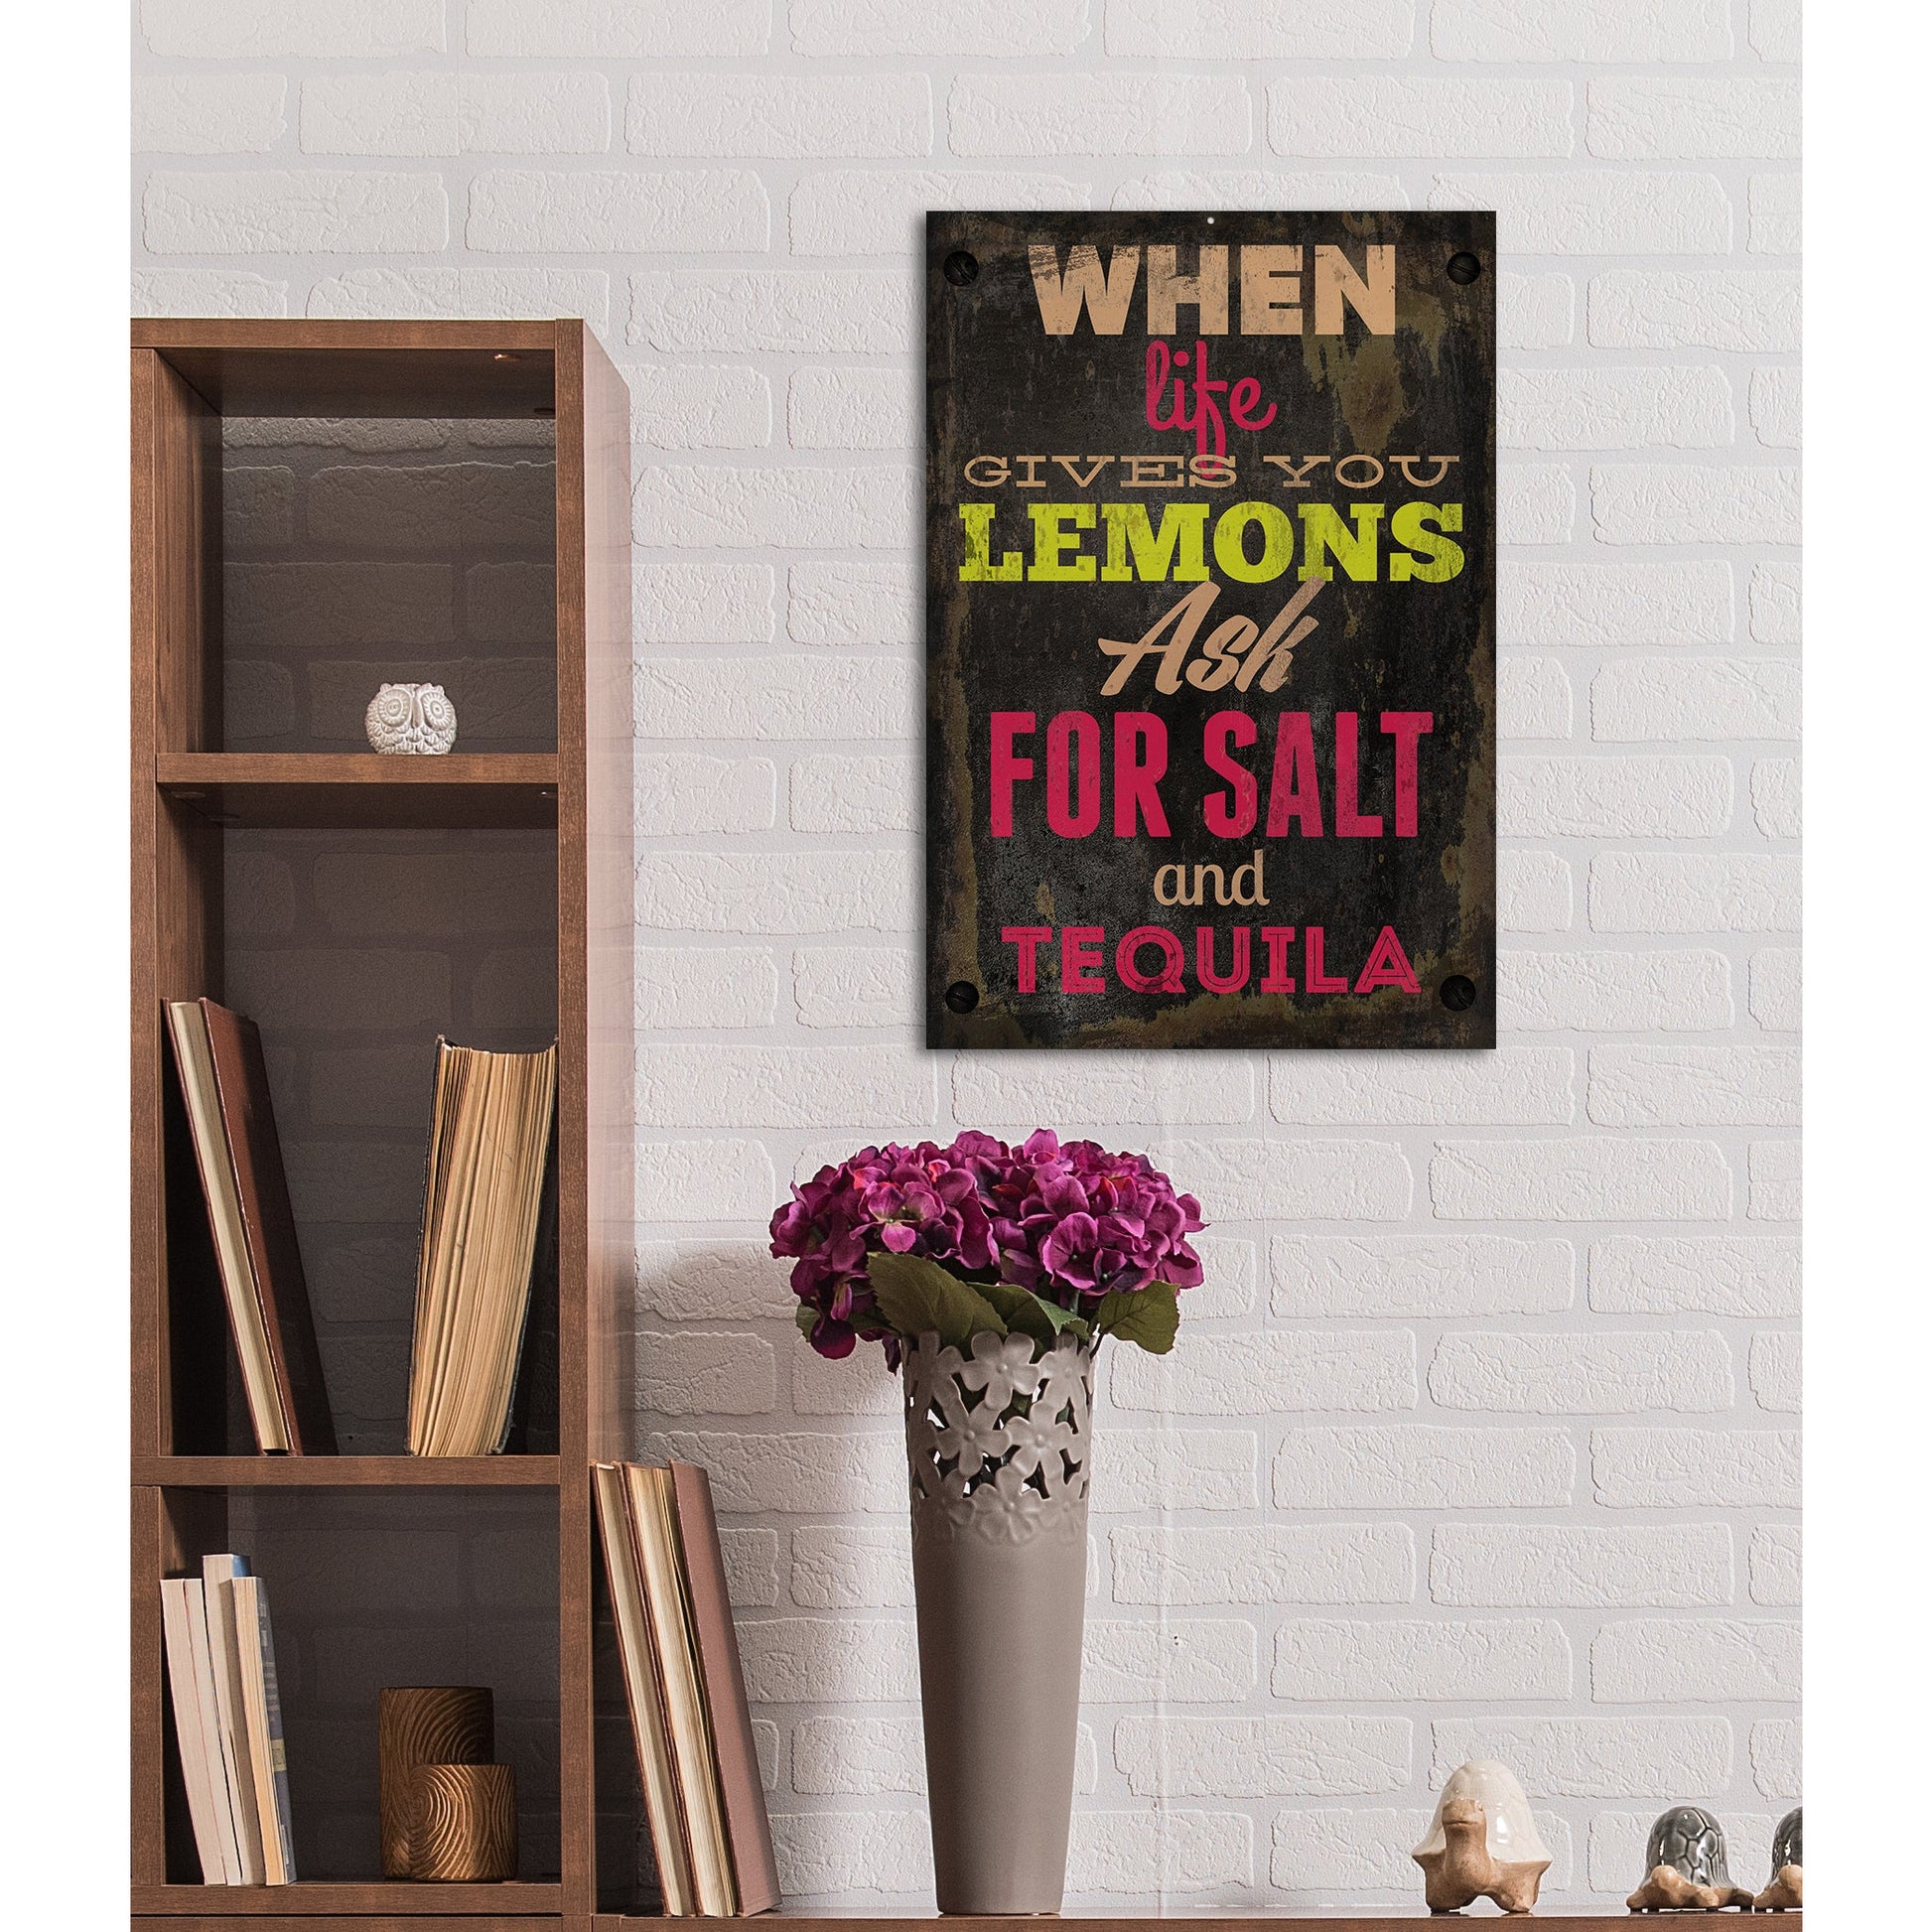 Blechschild - When life gives you lemons ask for salt and tequila Wohnbeispiel